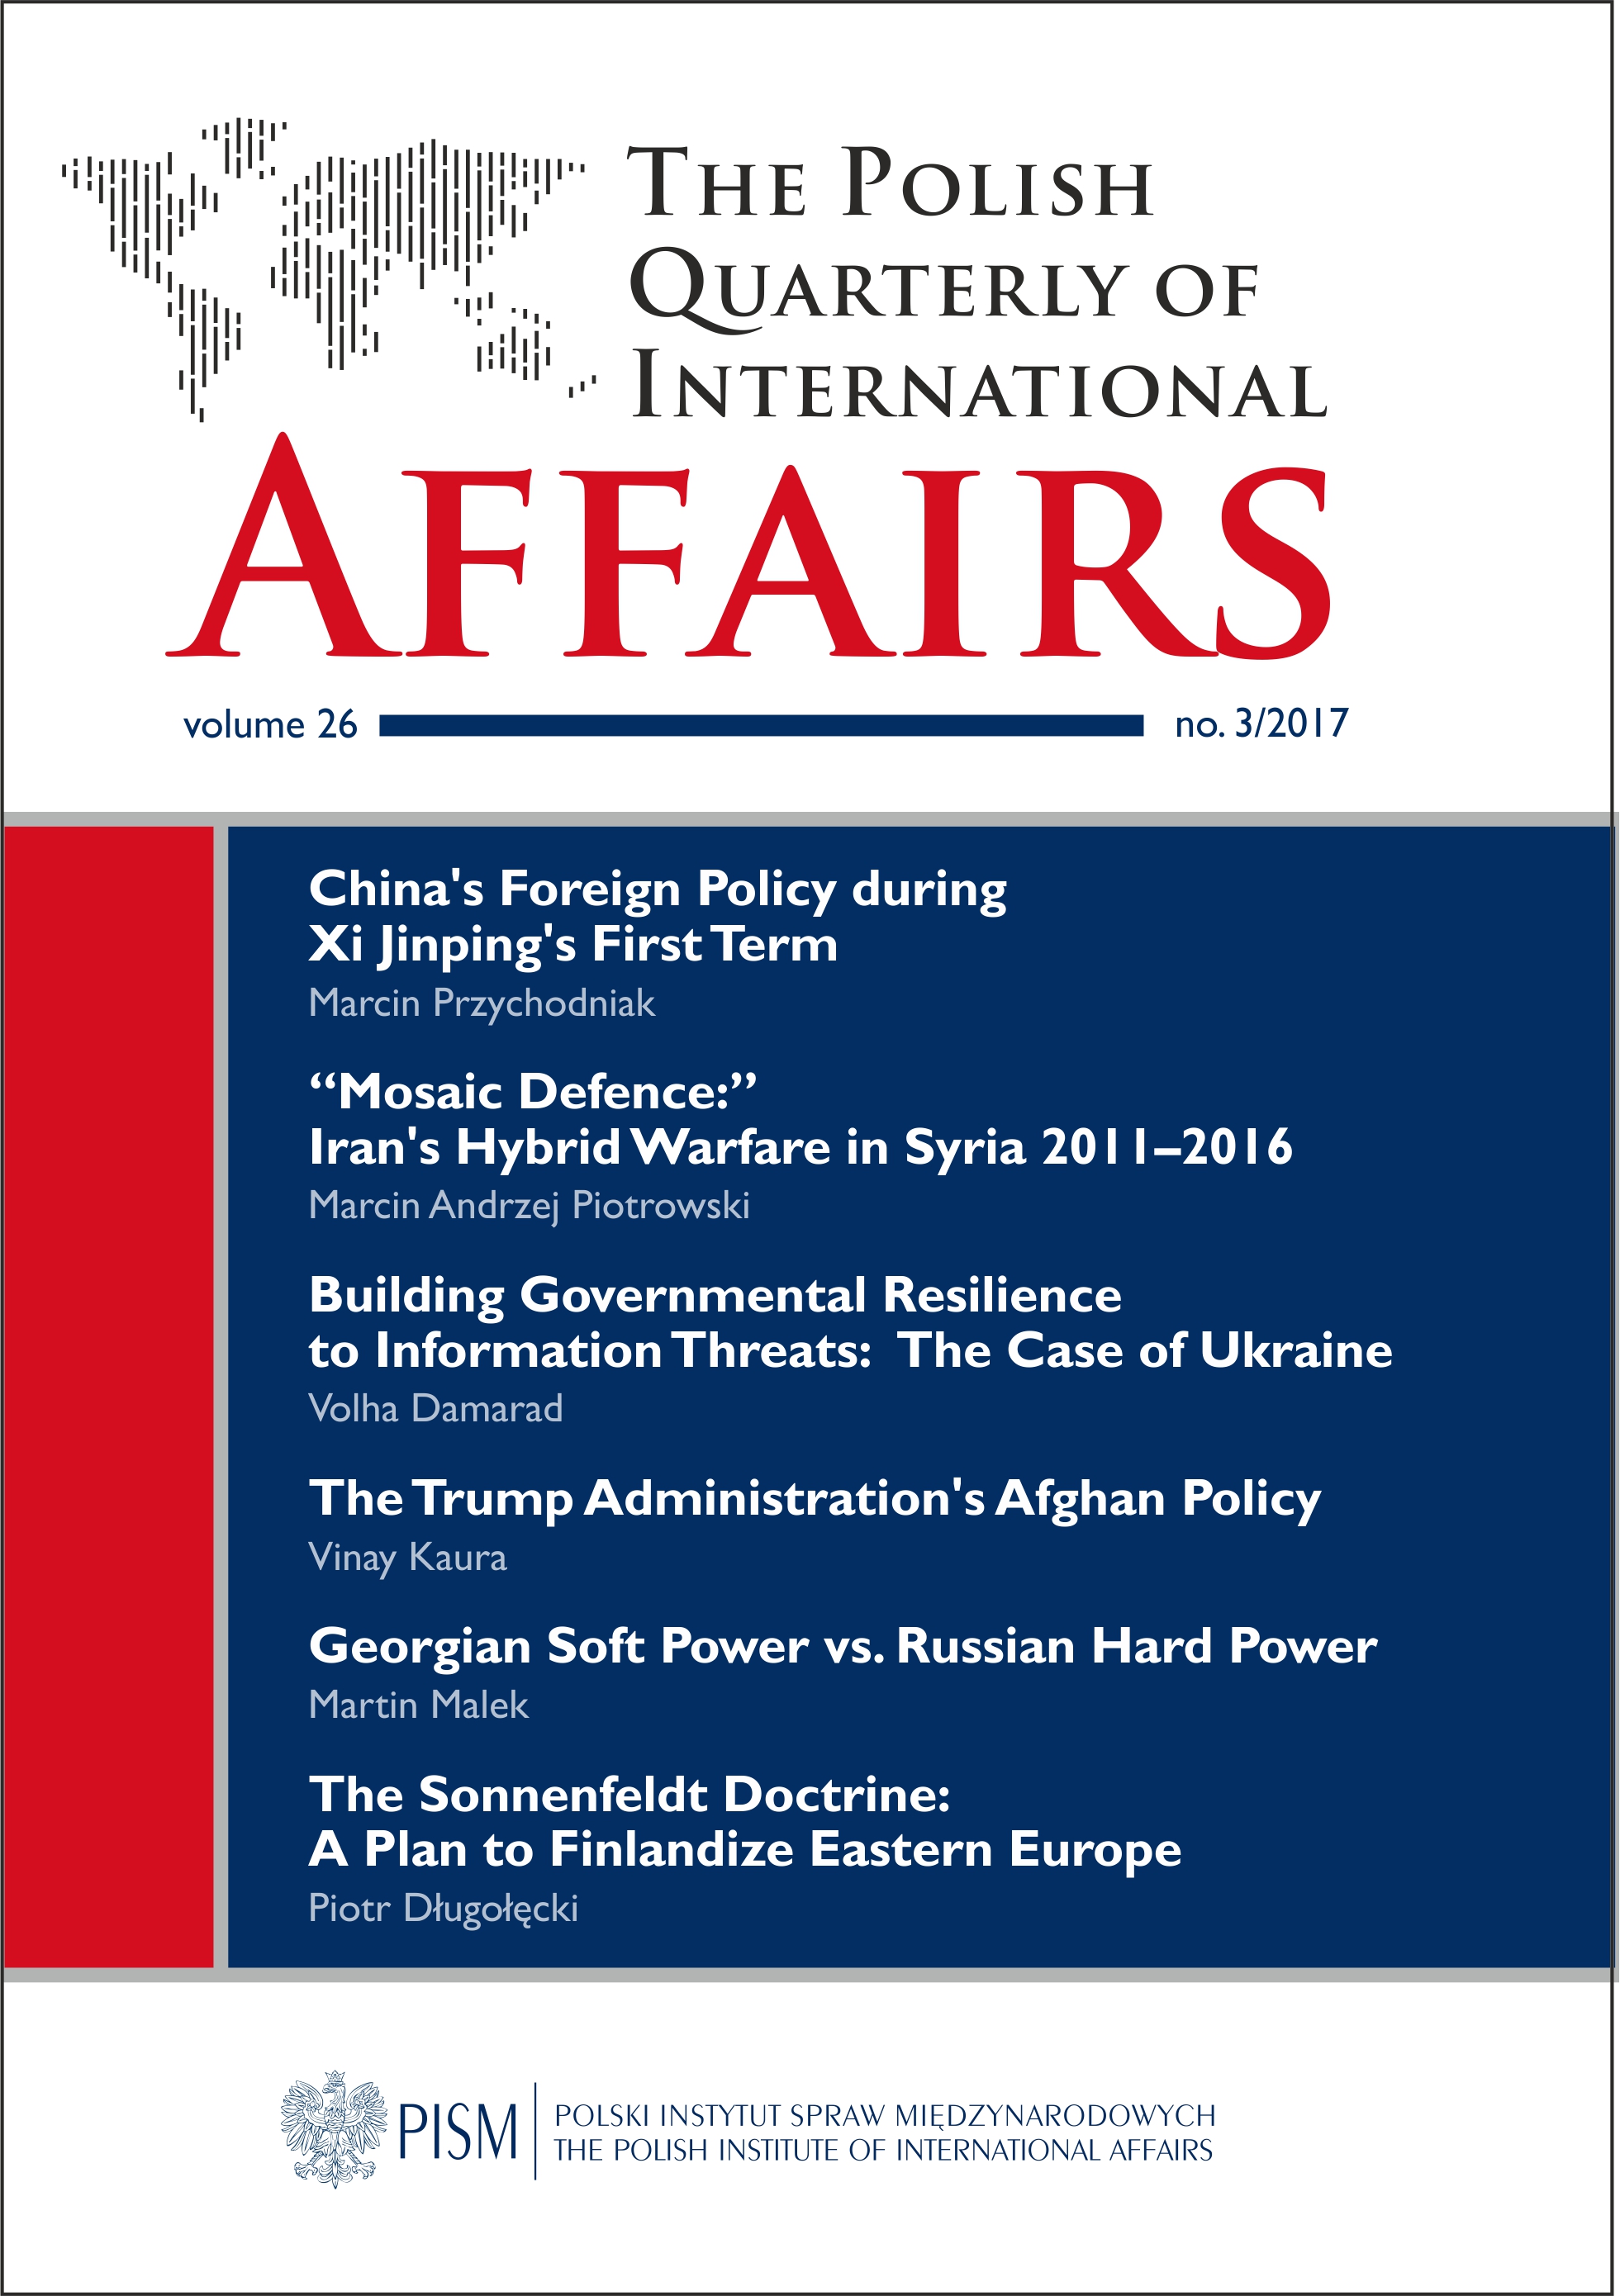 Georgian Soft Power vs. Russian Hard Power: What Can Be Done in View of South Ossetia’s “Creeping Border”?